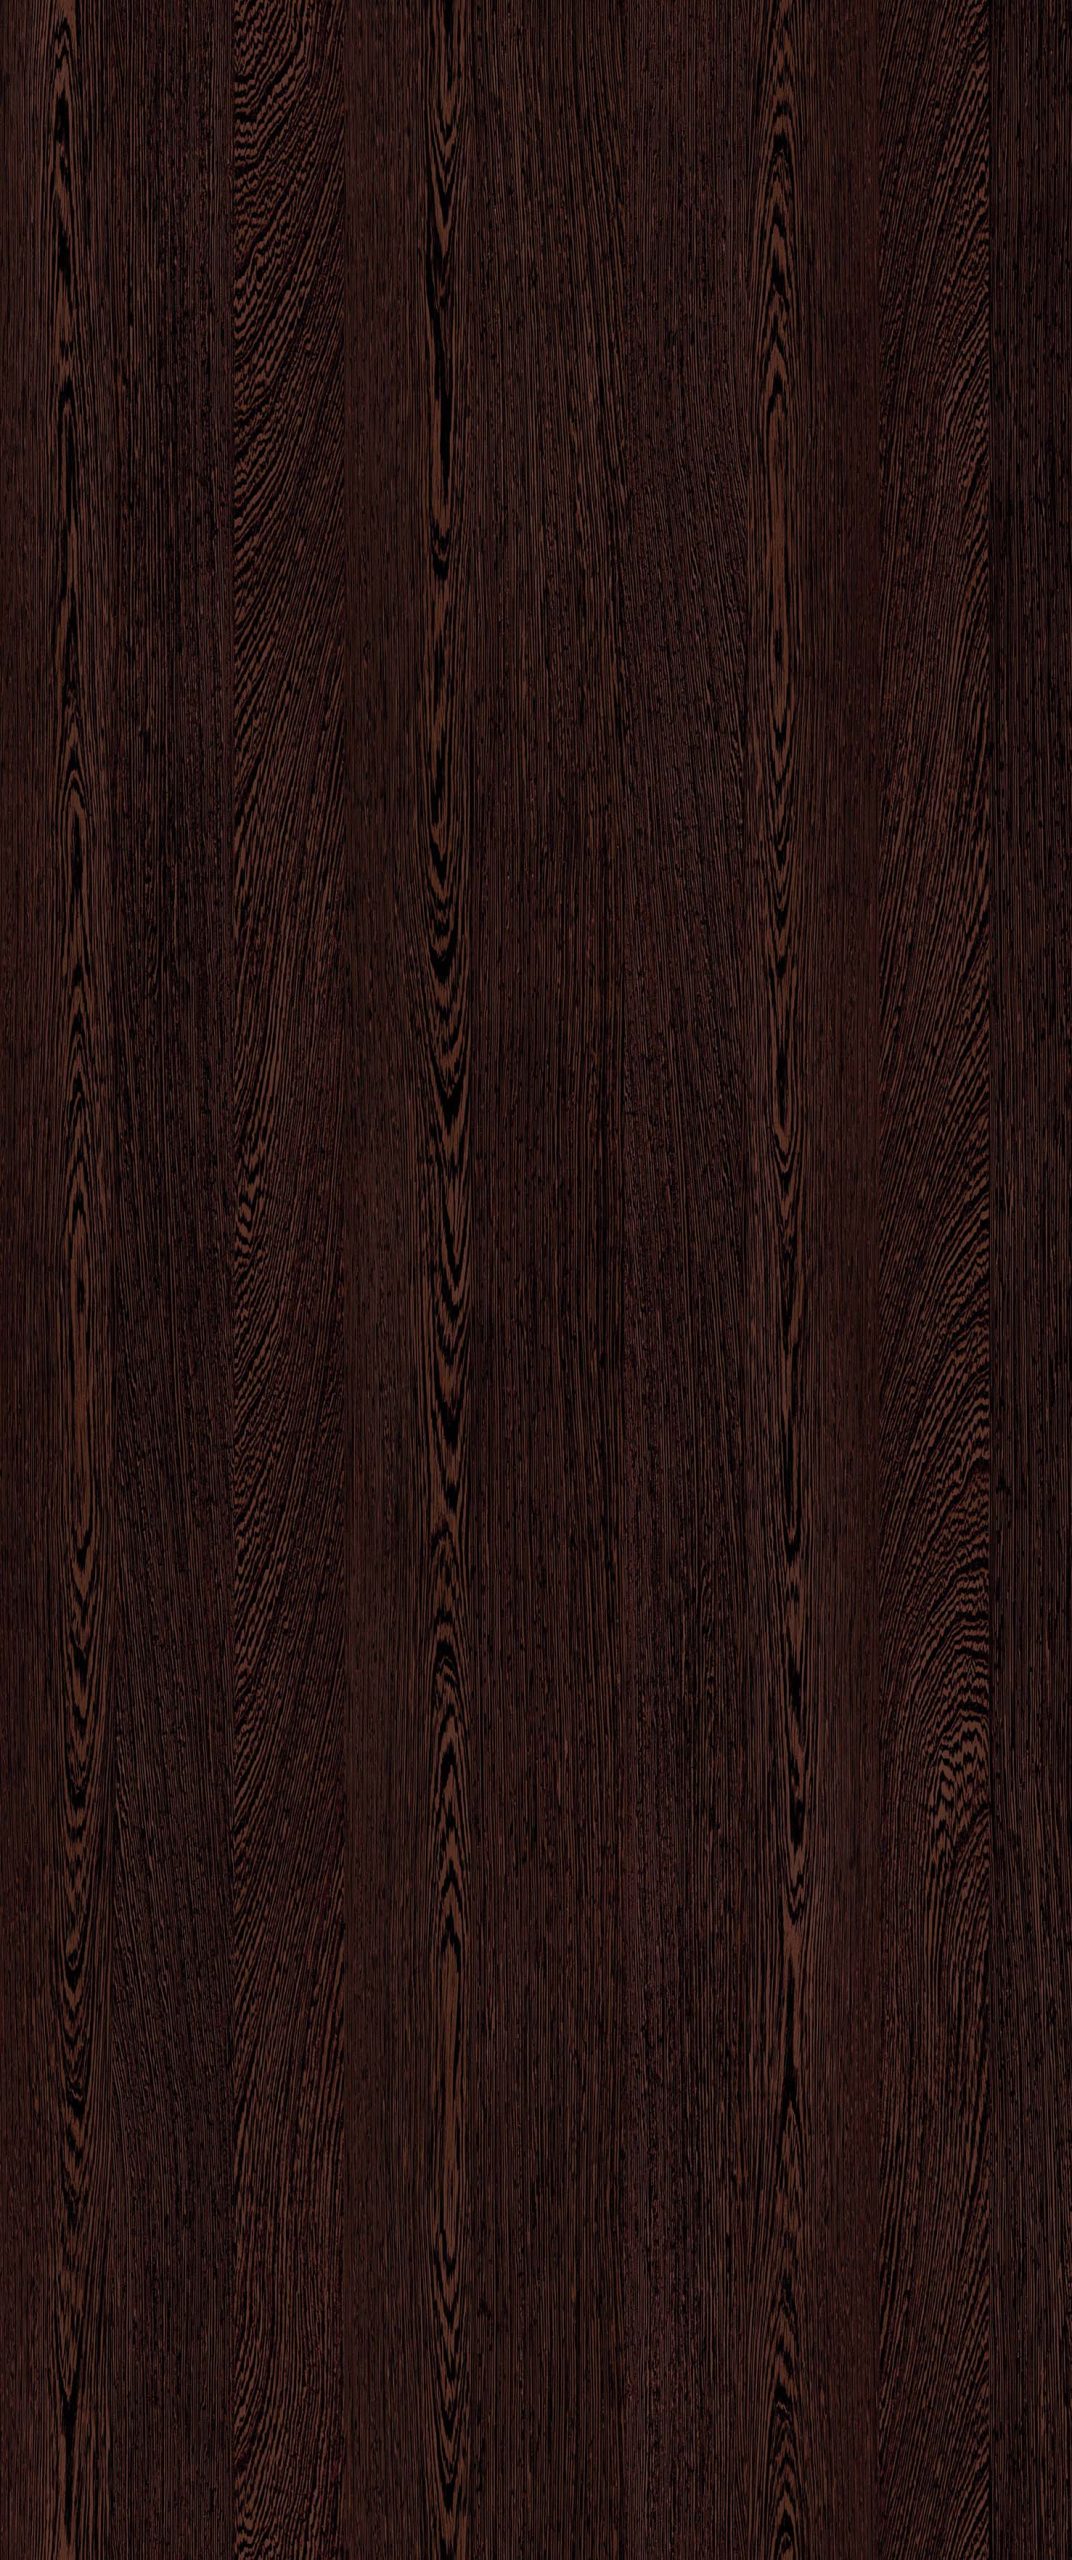 9102 Innate Wenge (SUD) exterior wall cladding in India